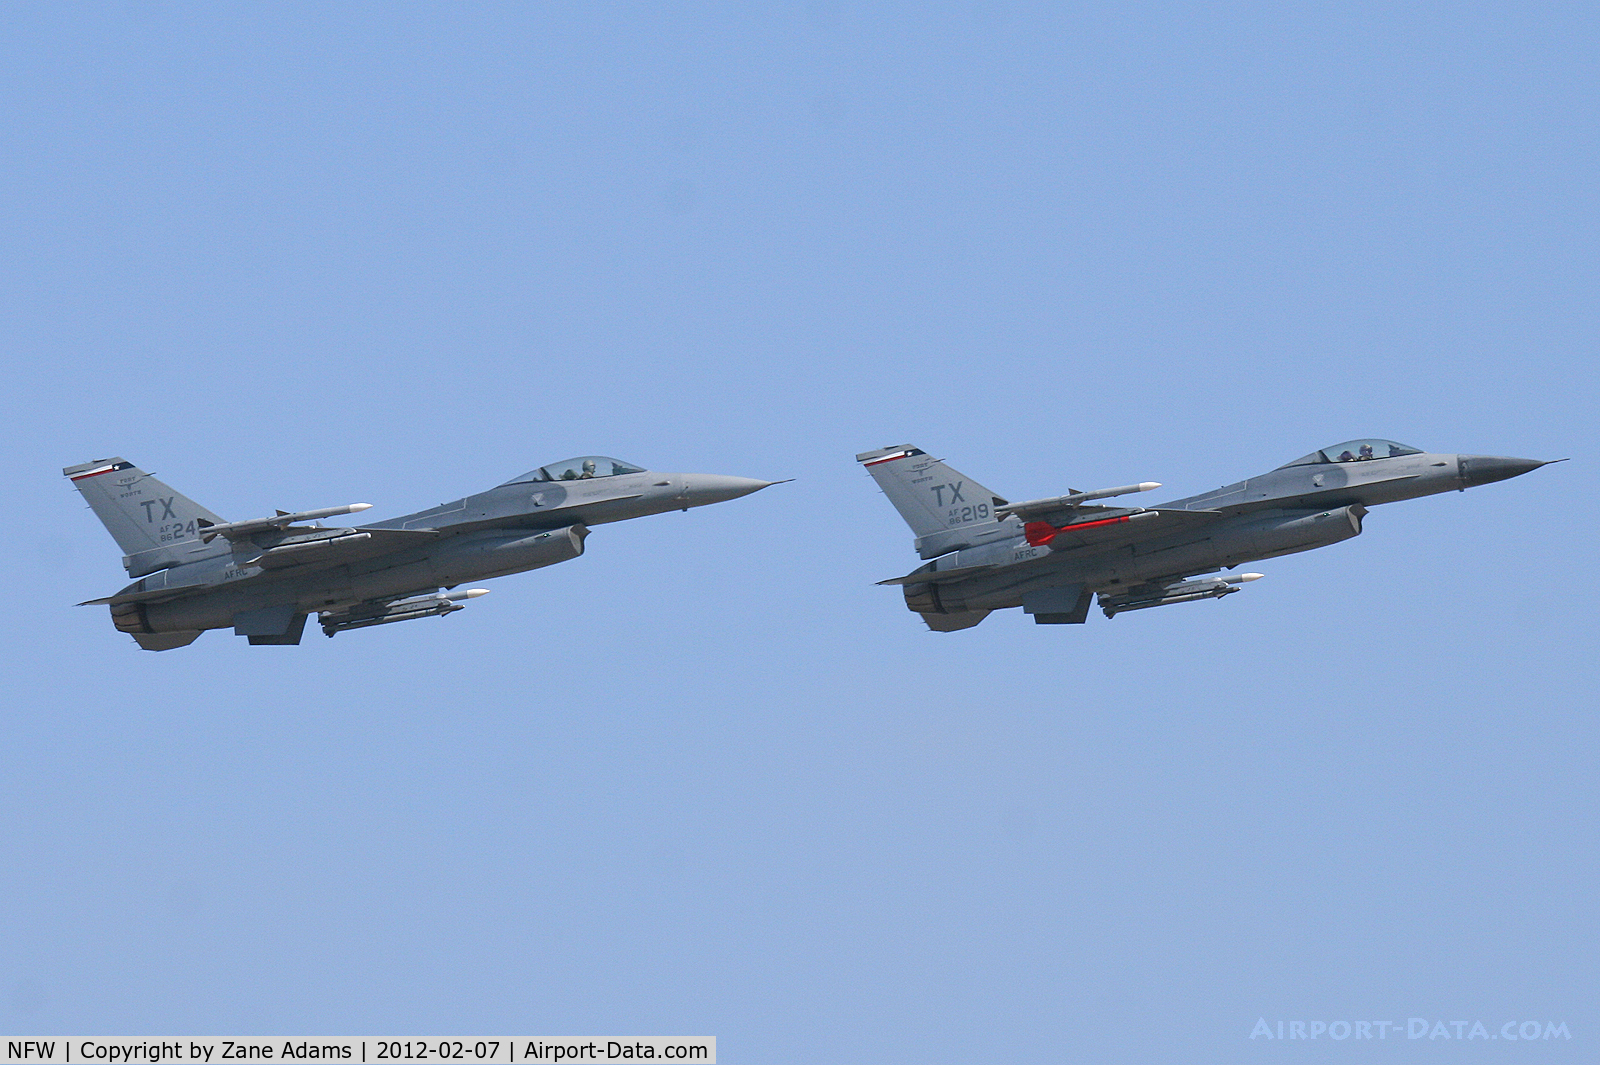 Fort Worth Nas Jrb/carswell Field Airport (NFW) - A pair of 457th Fighter Squadron F-16's departing NAS JRB Fort Worth. 